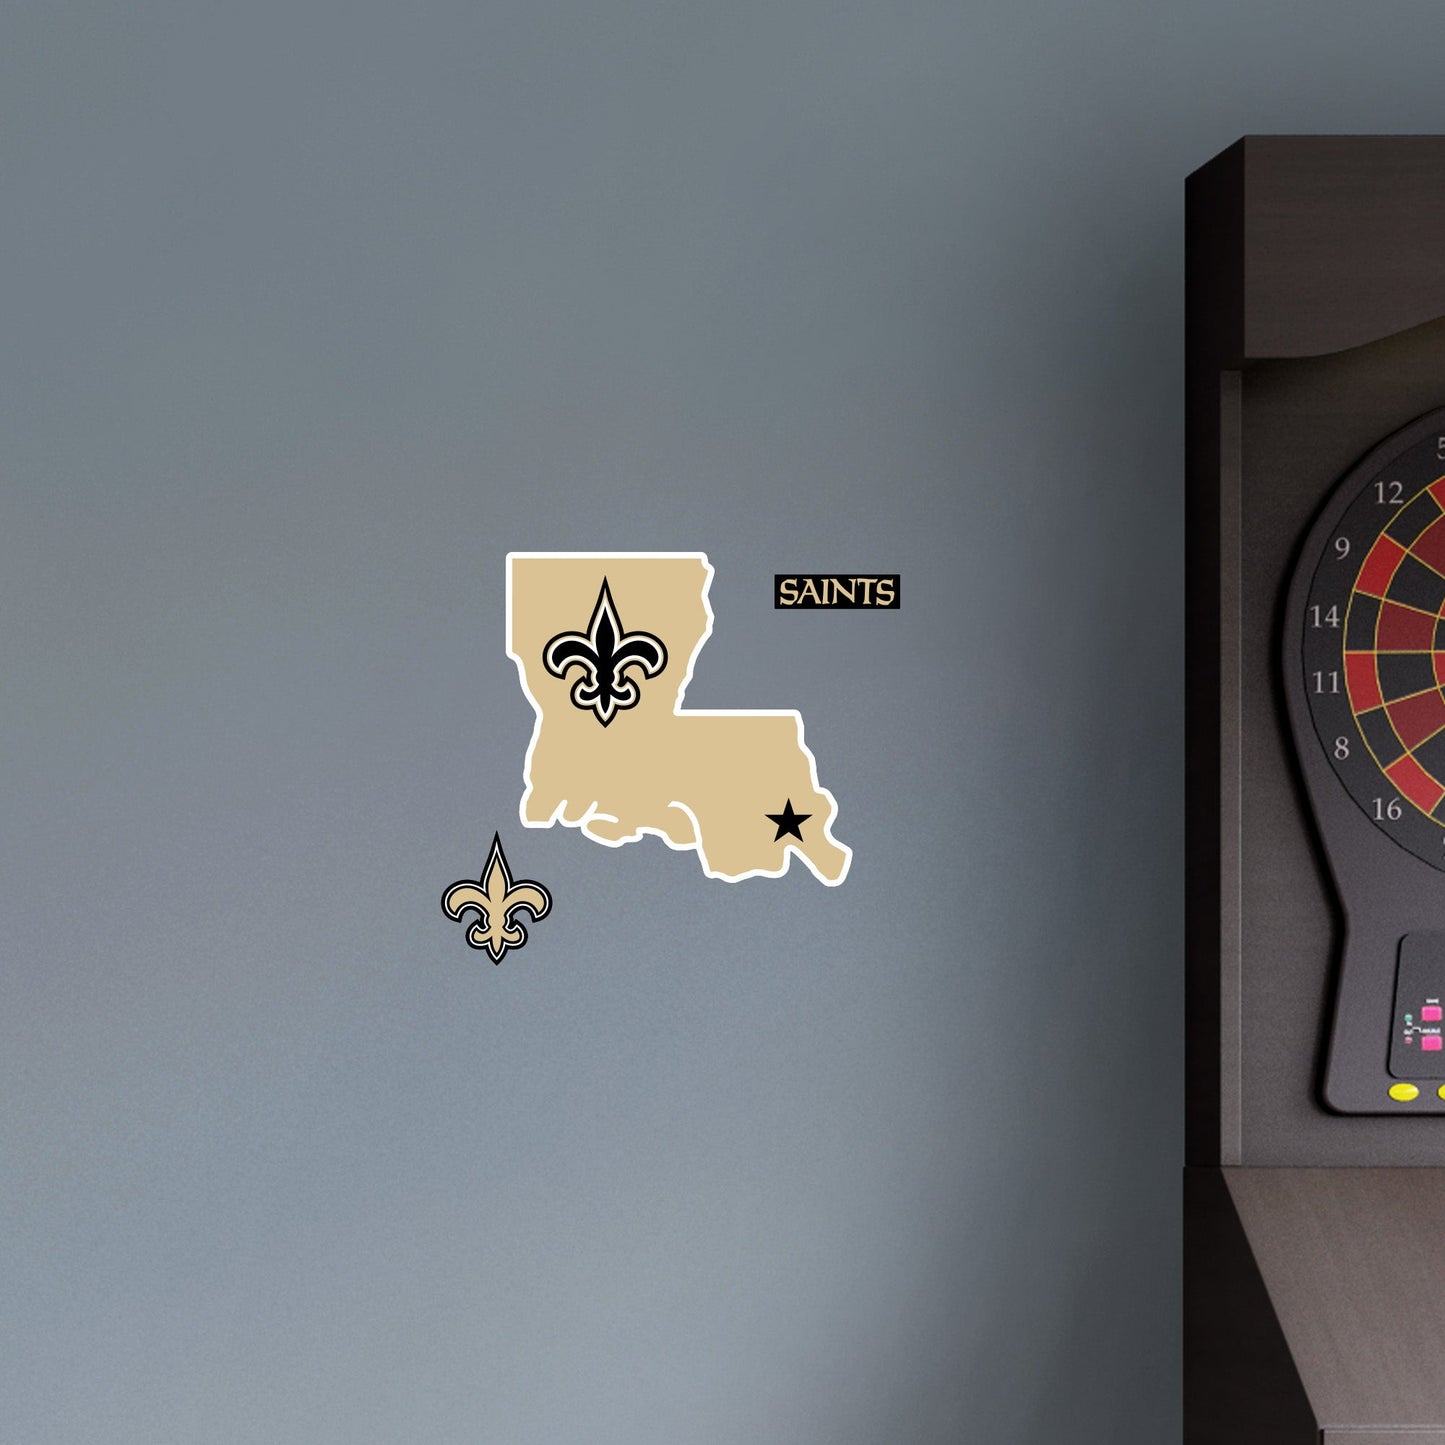 New Orleans Saints:   Louisiana Logo        - Officially Licensed NFL Removable     Adhesive Decal